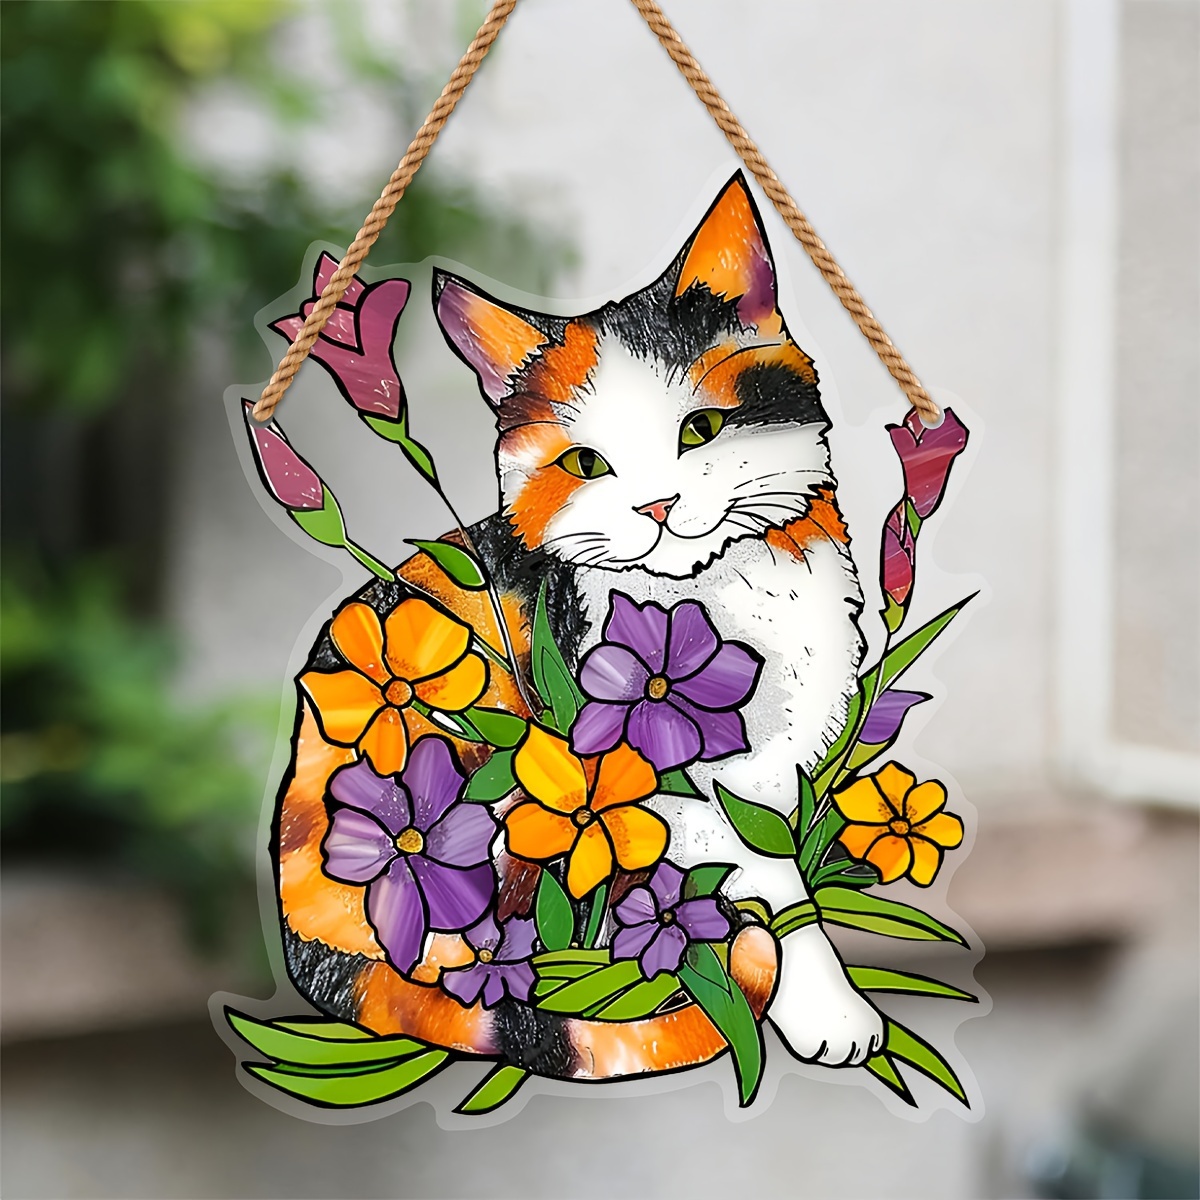 

Charming Yellow Cat & Flowers Suncatcher - Acrylic Window Hanging For Indoor/outdoor Decor, Perfect Gift For Cat Lovers